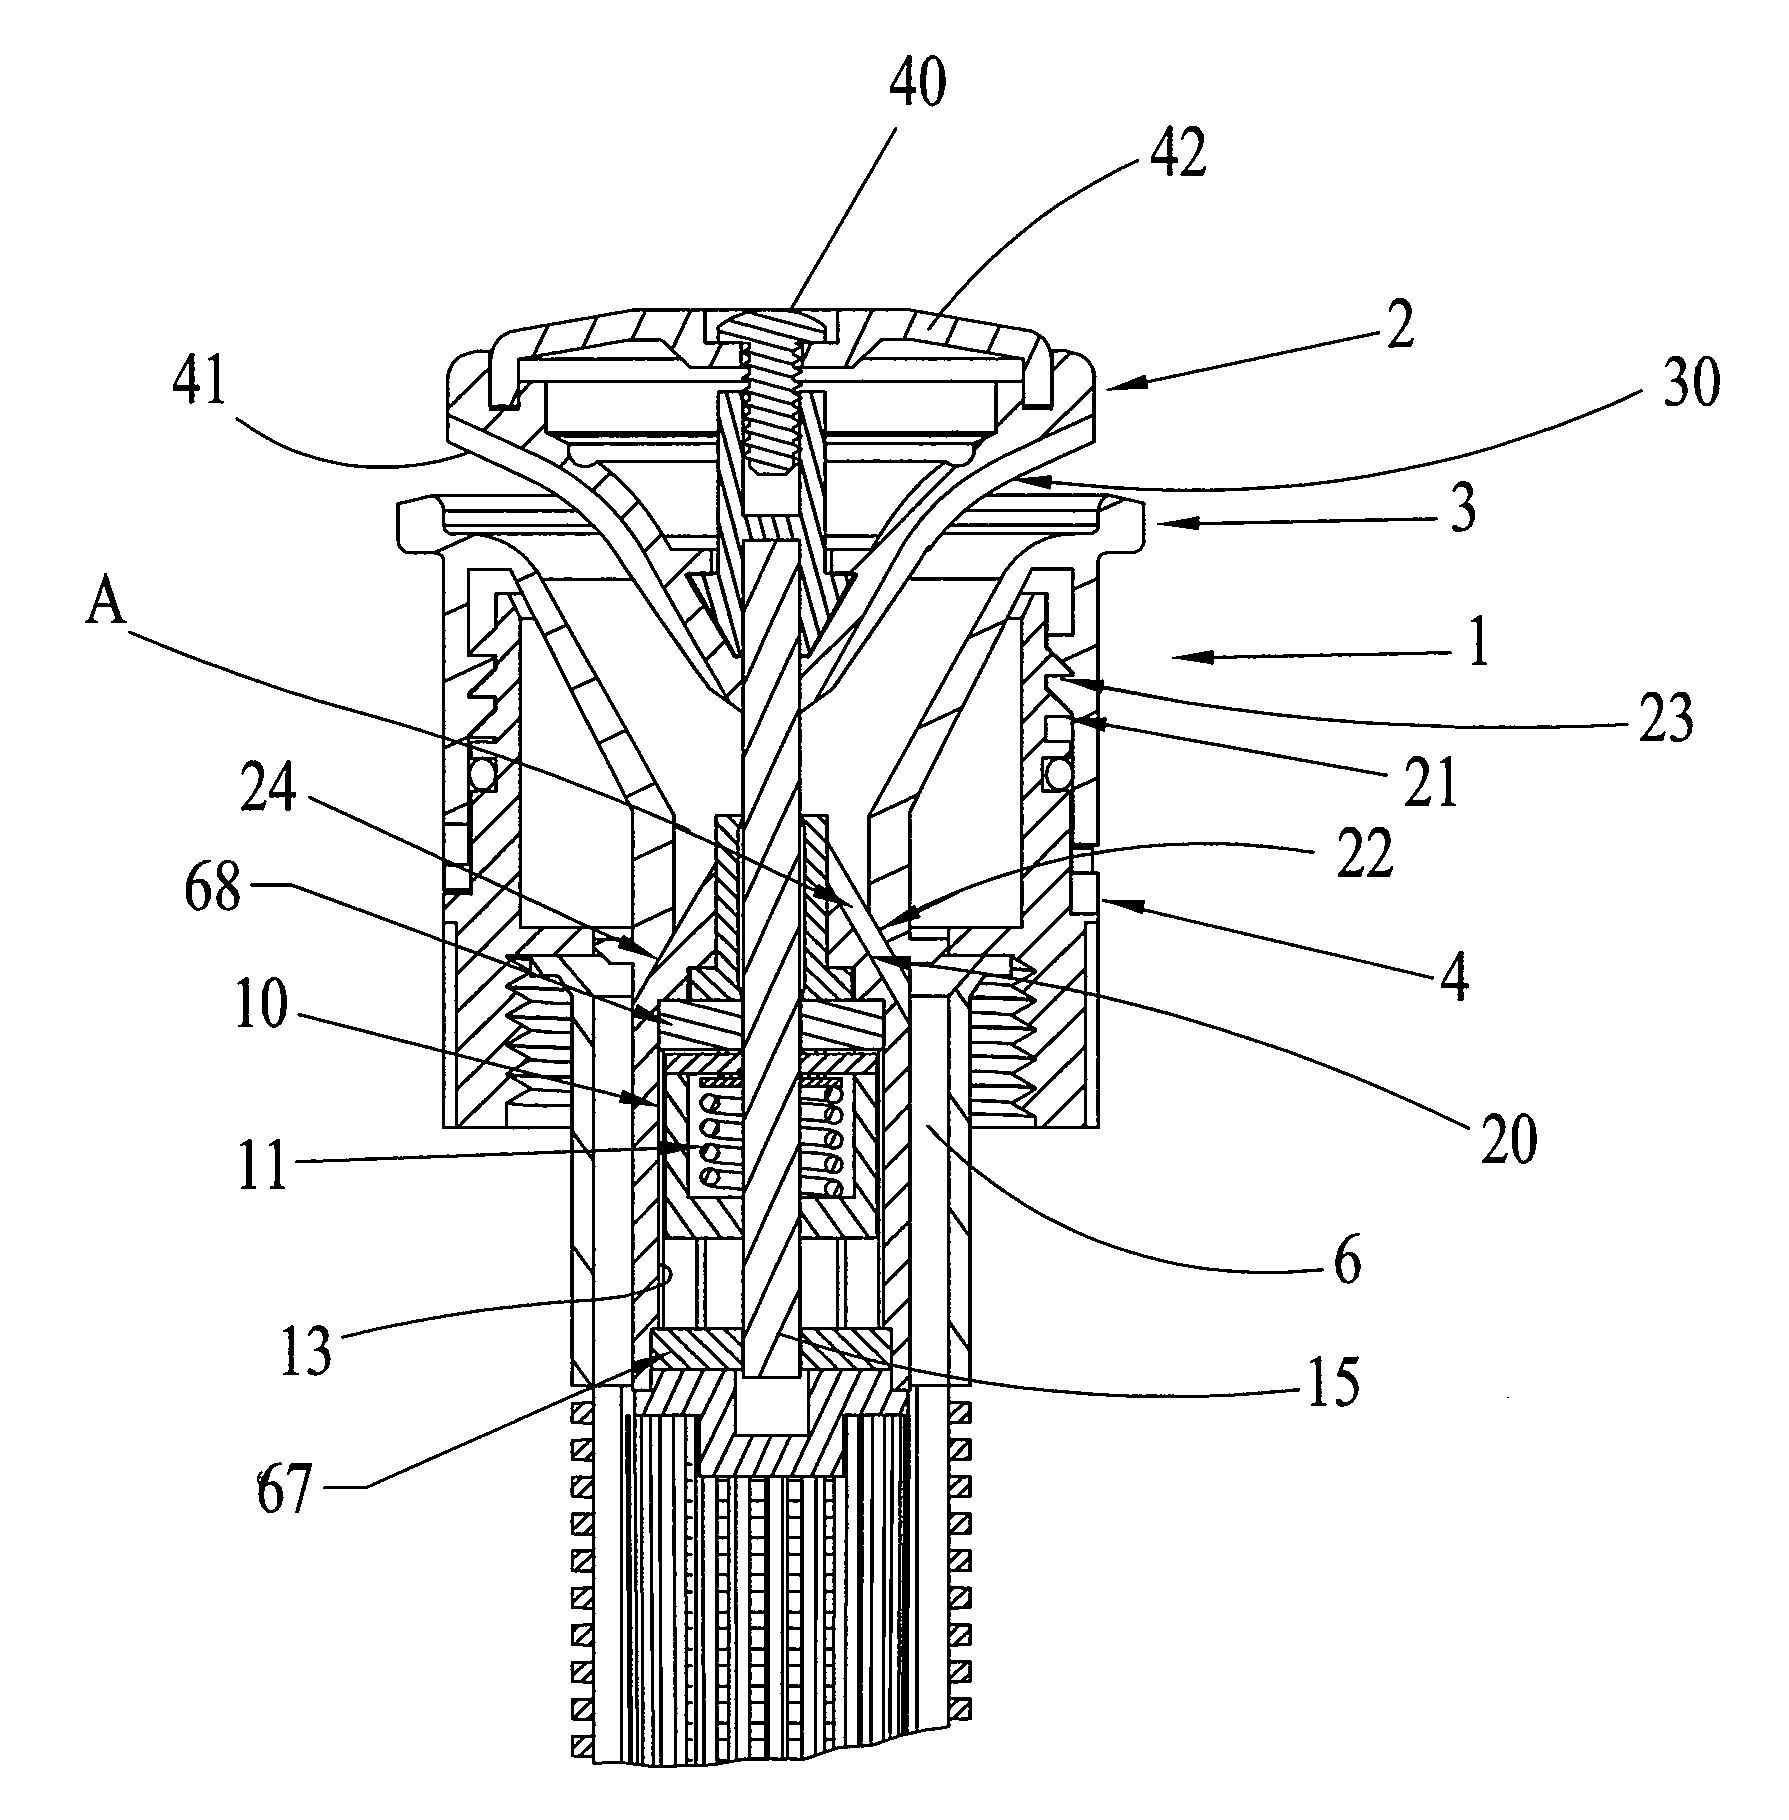 Sprinkler head nozzle assembly with adjustable arc, flow rate and stream angle